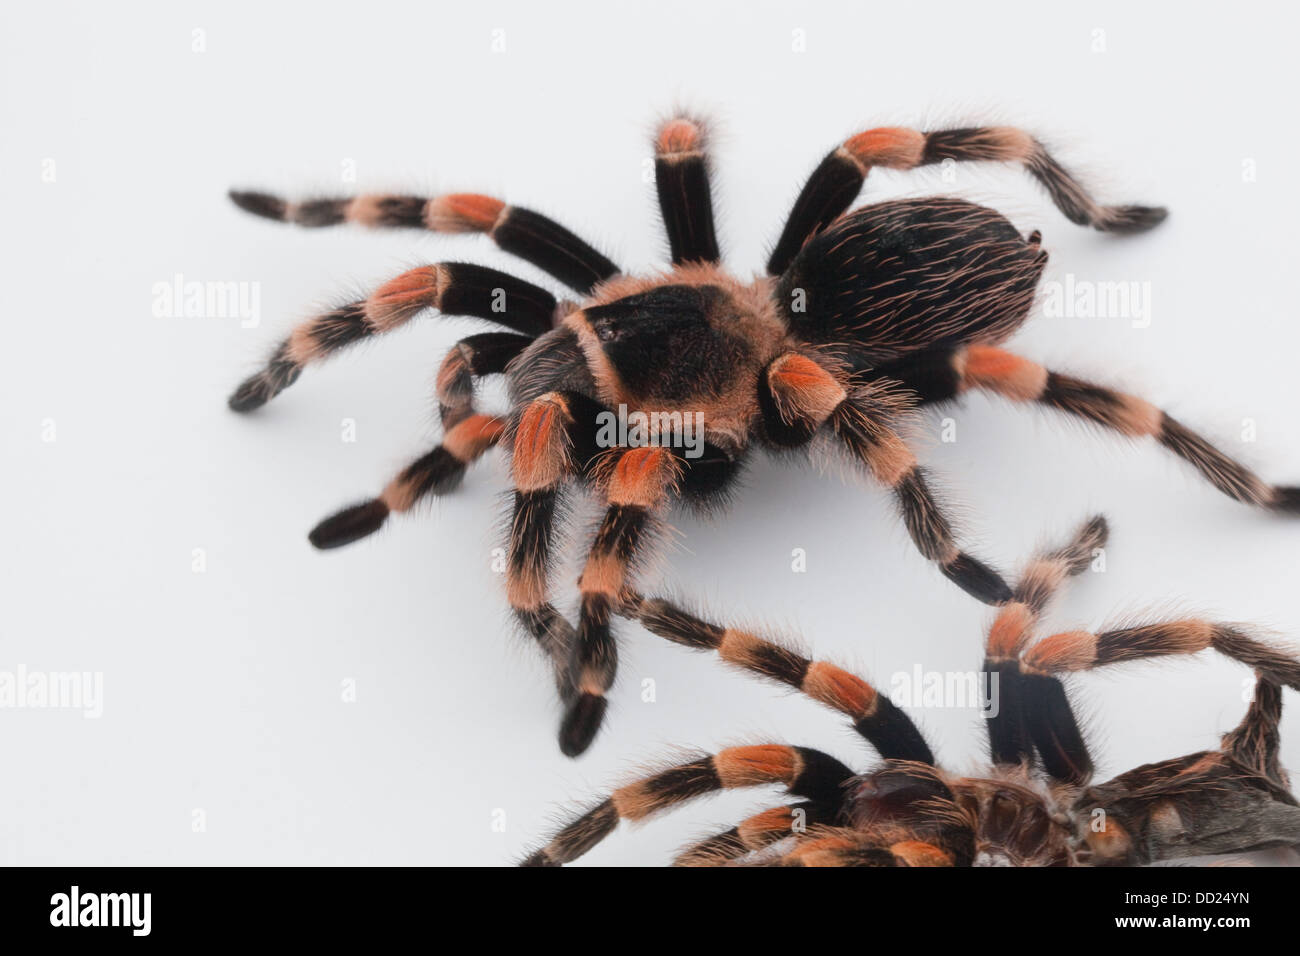 Mexican Red-kneed Tarantula Spider (Brachypelma smithi). Shed, moulted skin or exo-skeleton below, living spider above. Stock Photo